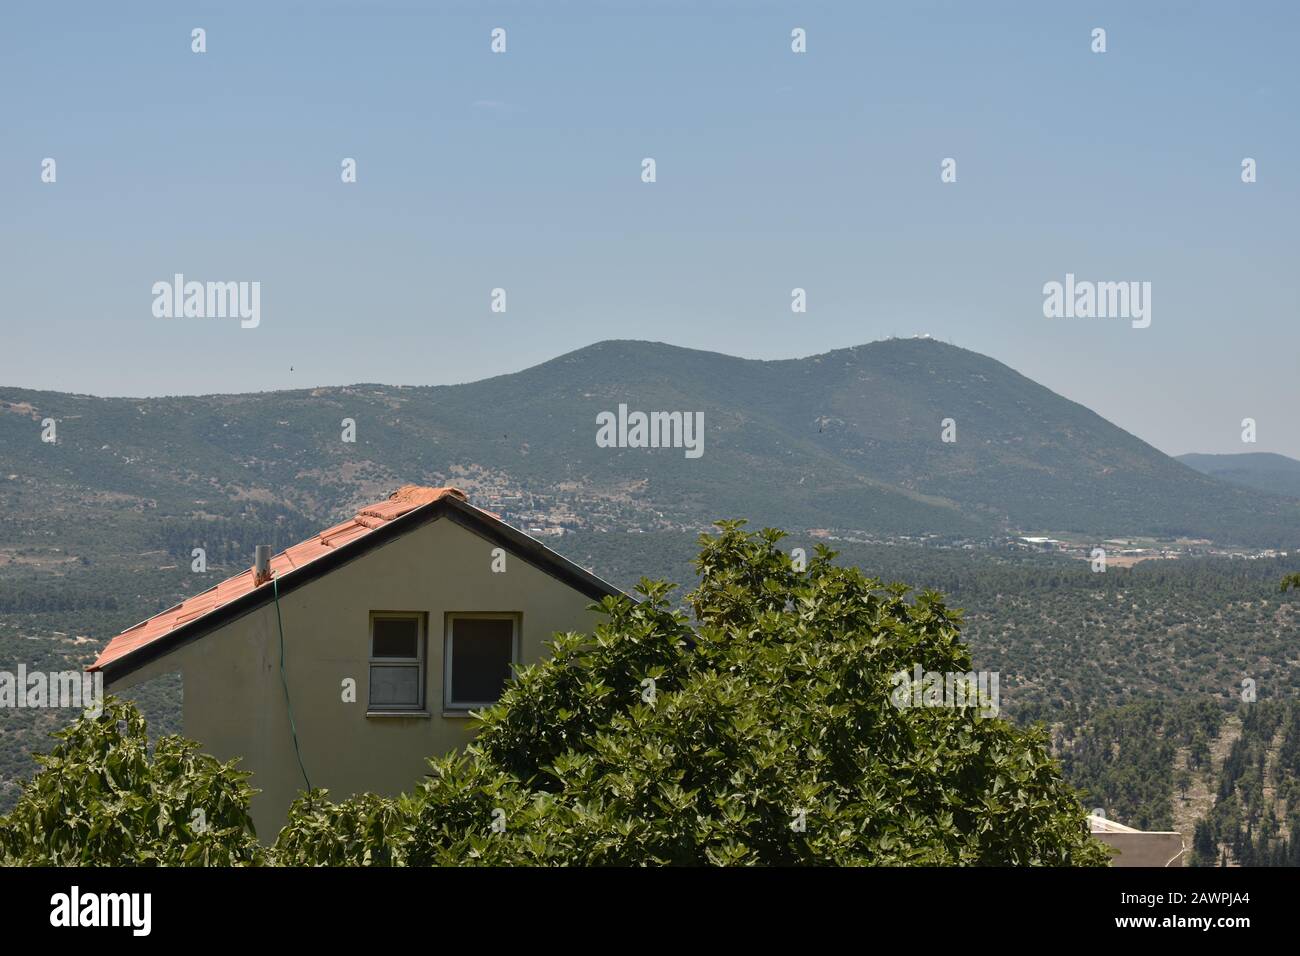 Landscape of mountains and a building in the mystical city of Tzfat Stock Photo